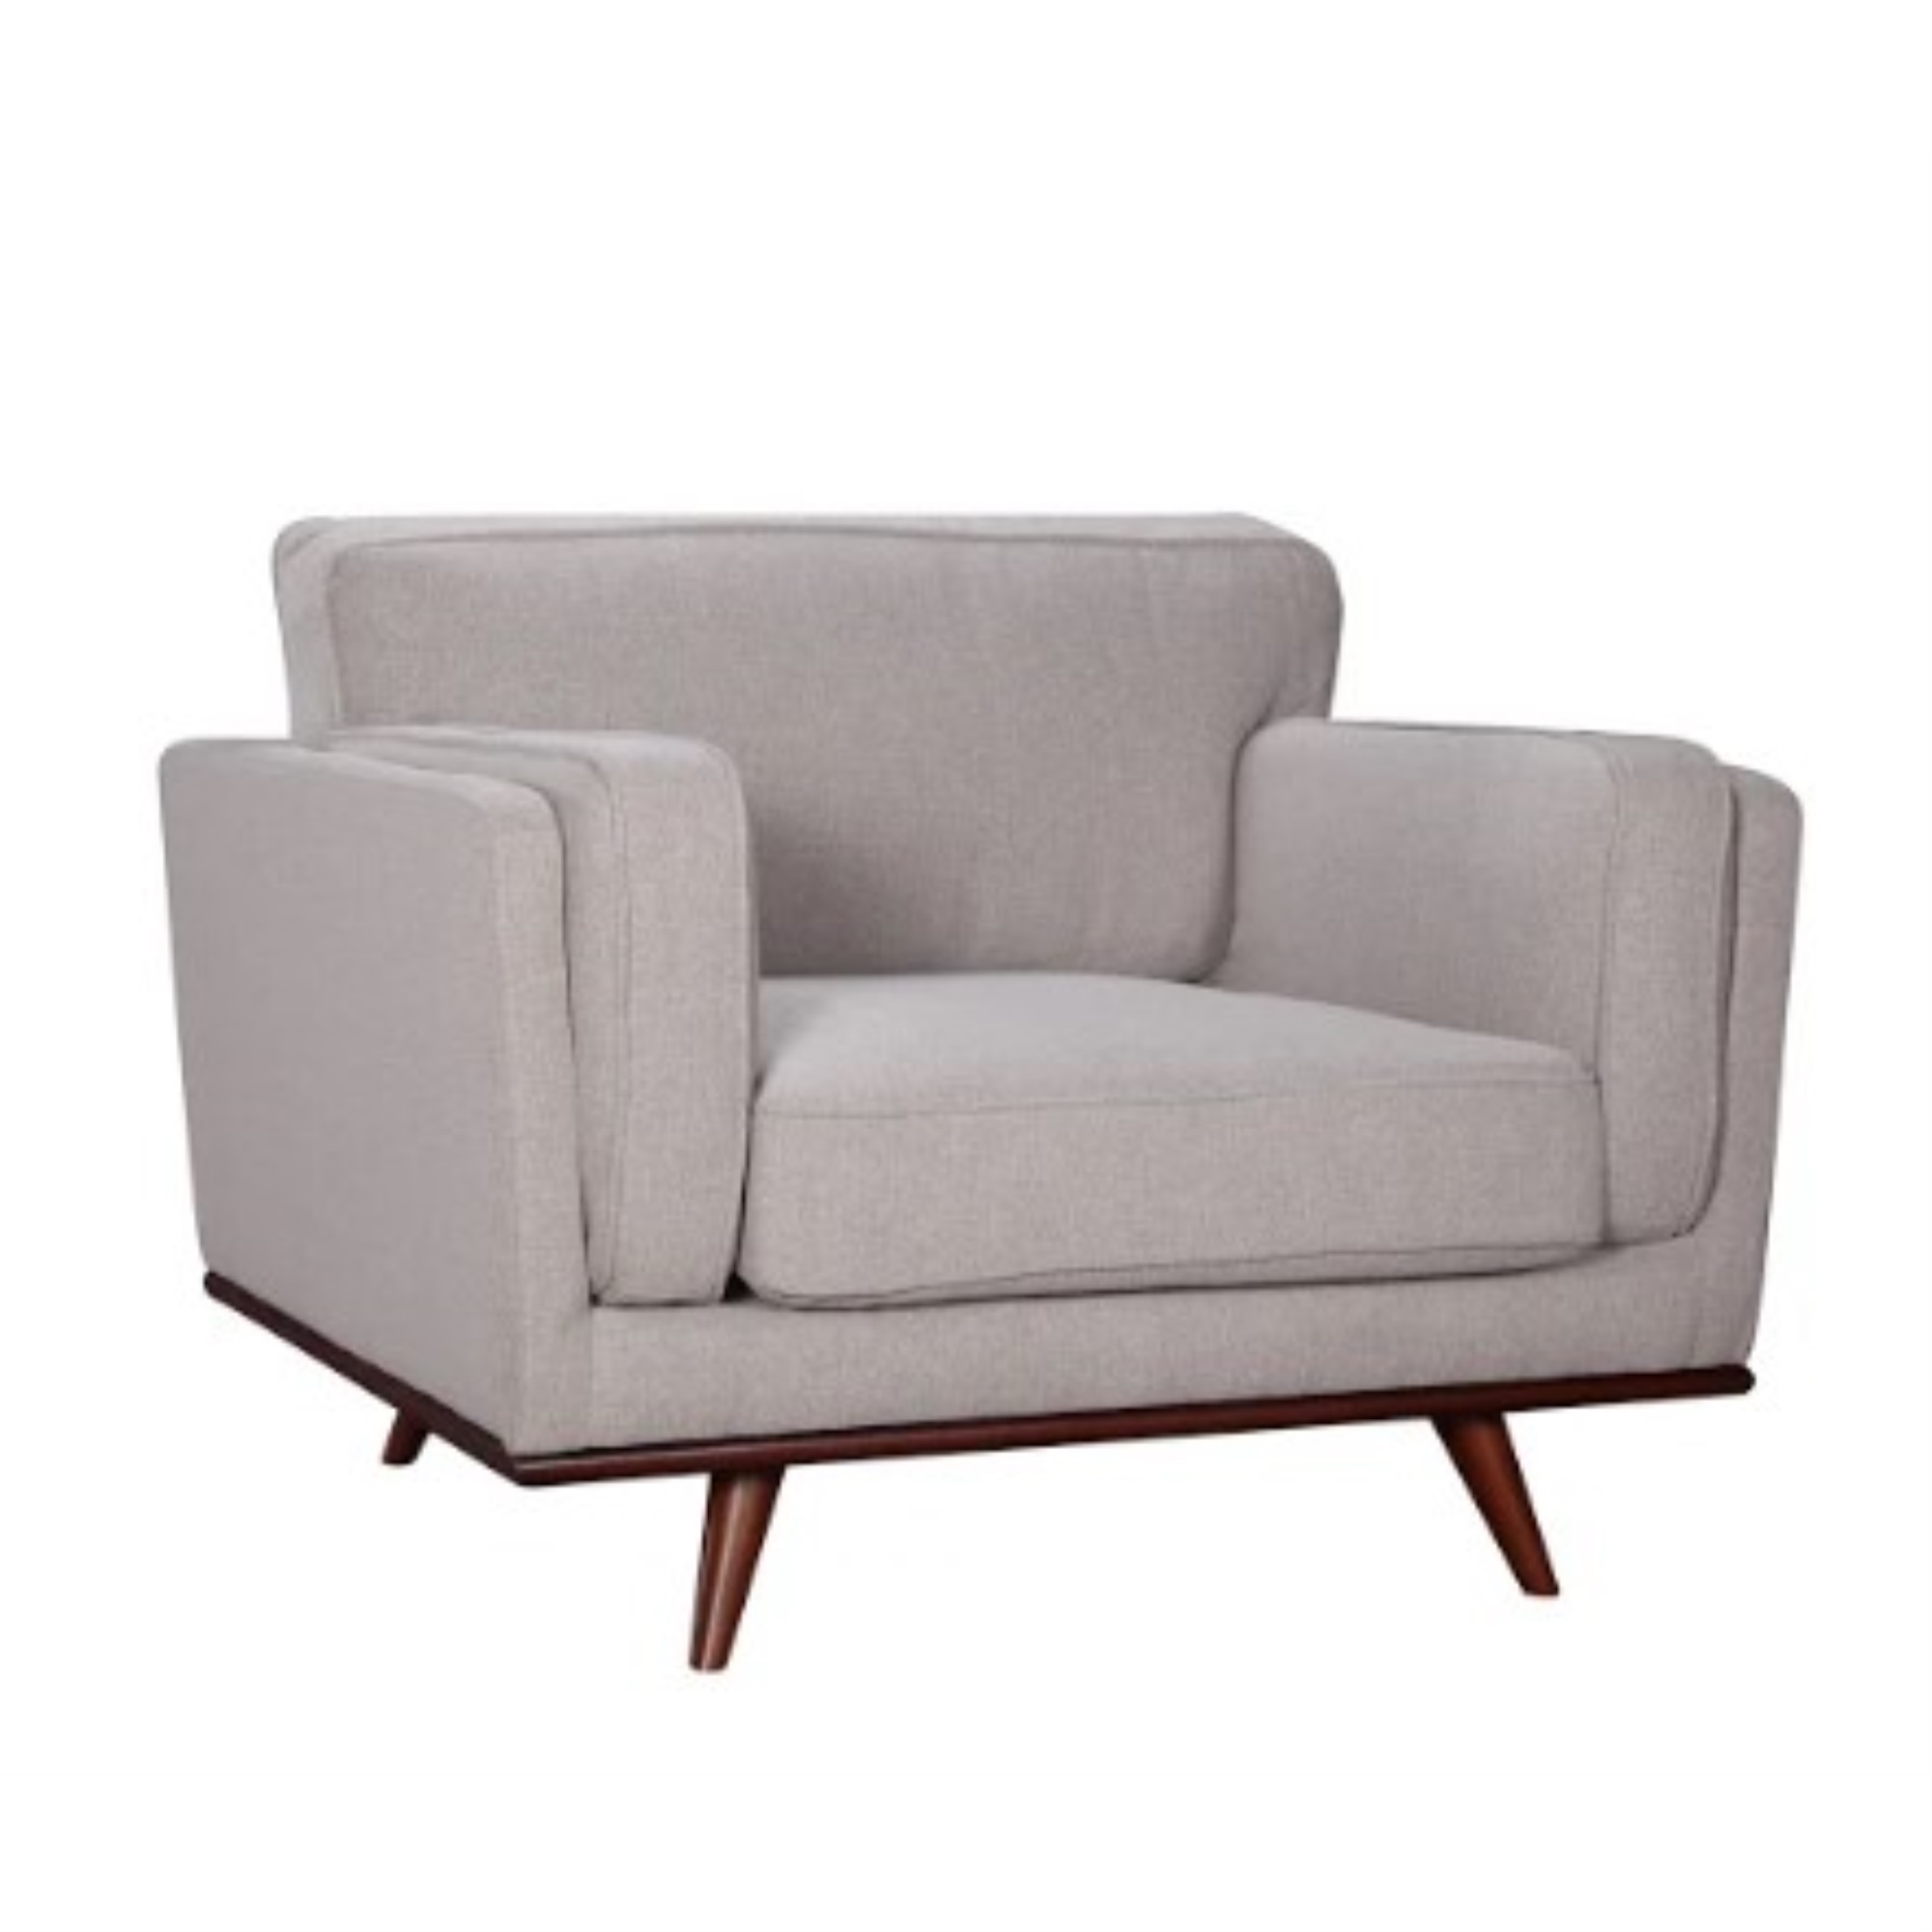 44" X 39" X 34" Light Taupe Polyester Chair